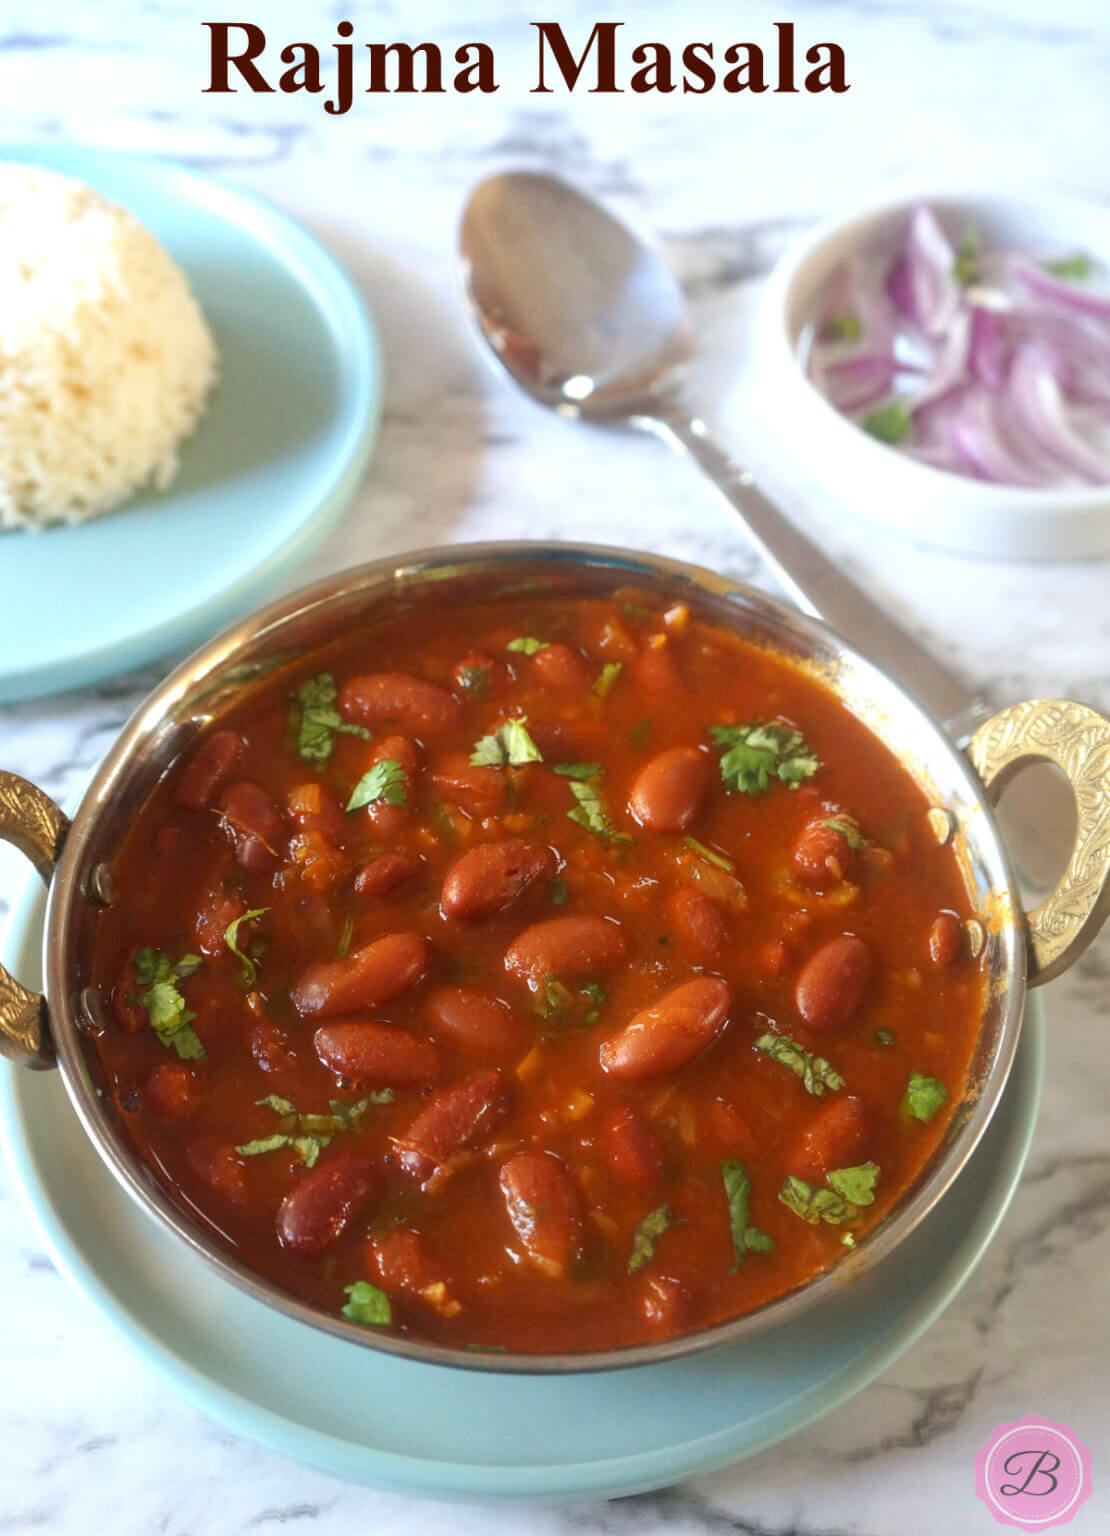 Rajma Masala with Rice and Sliced Onions on the Side